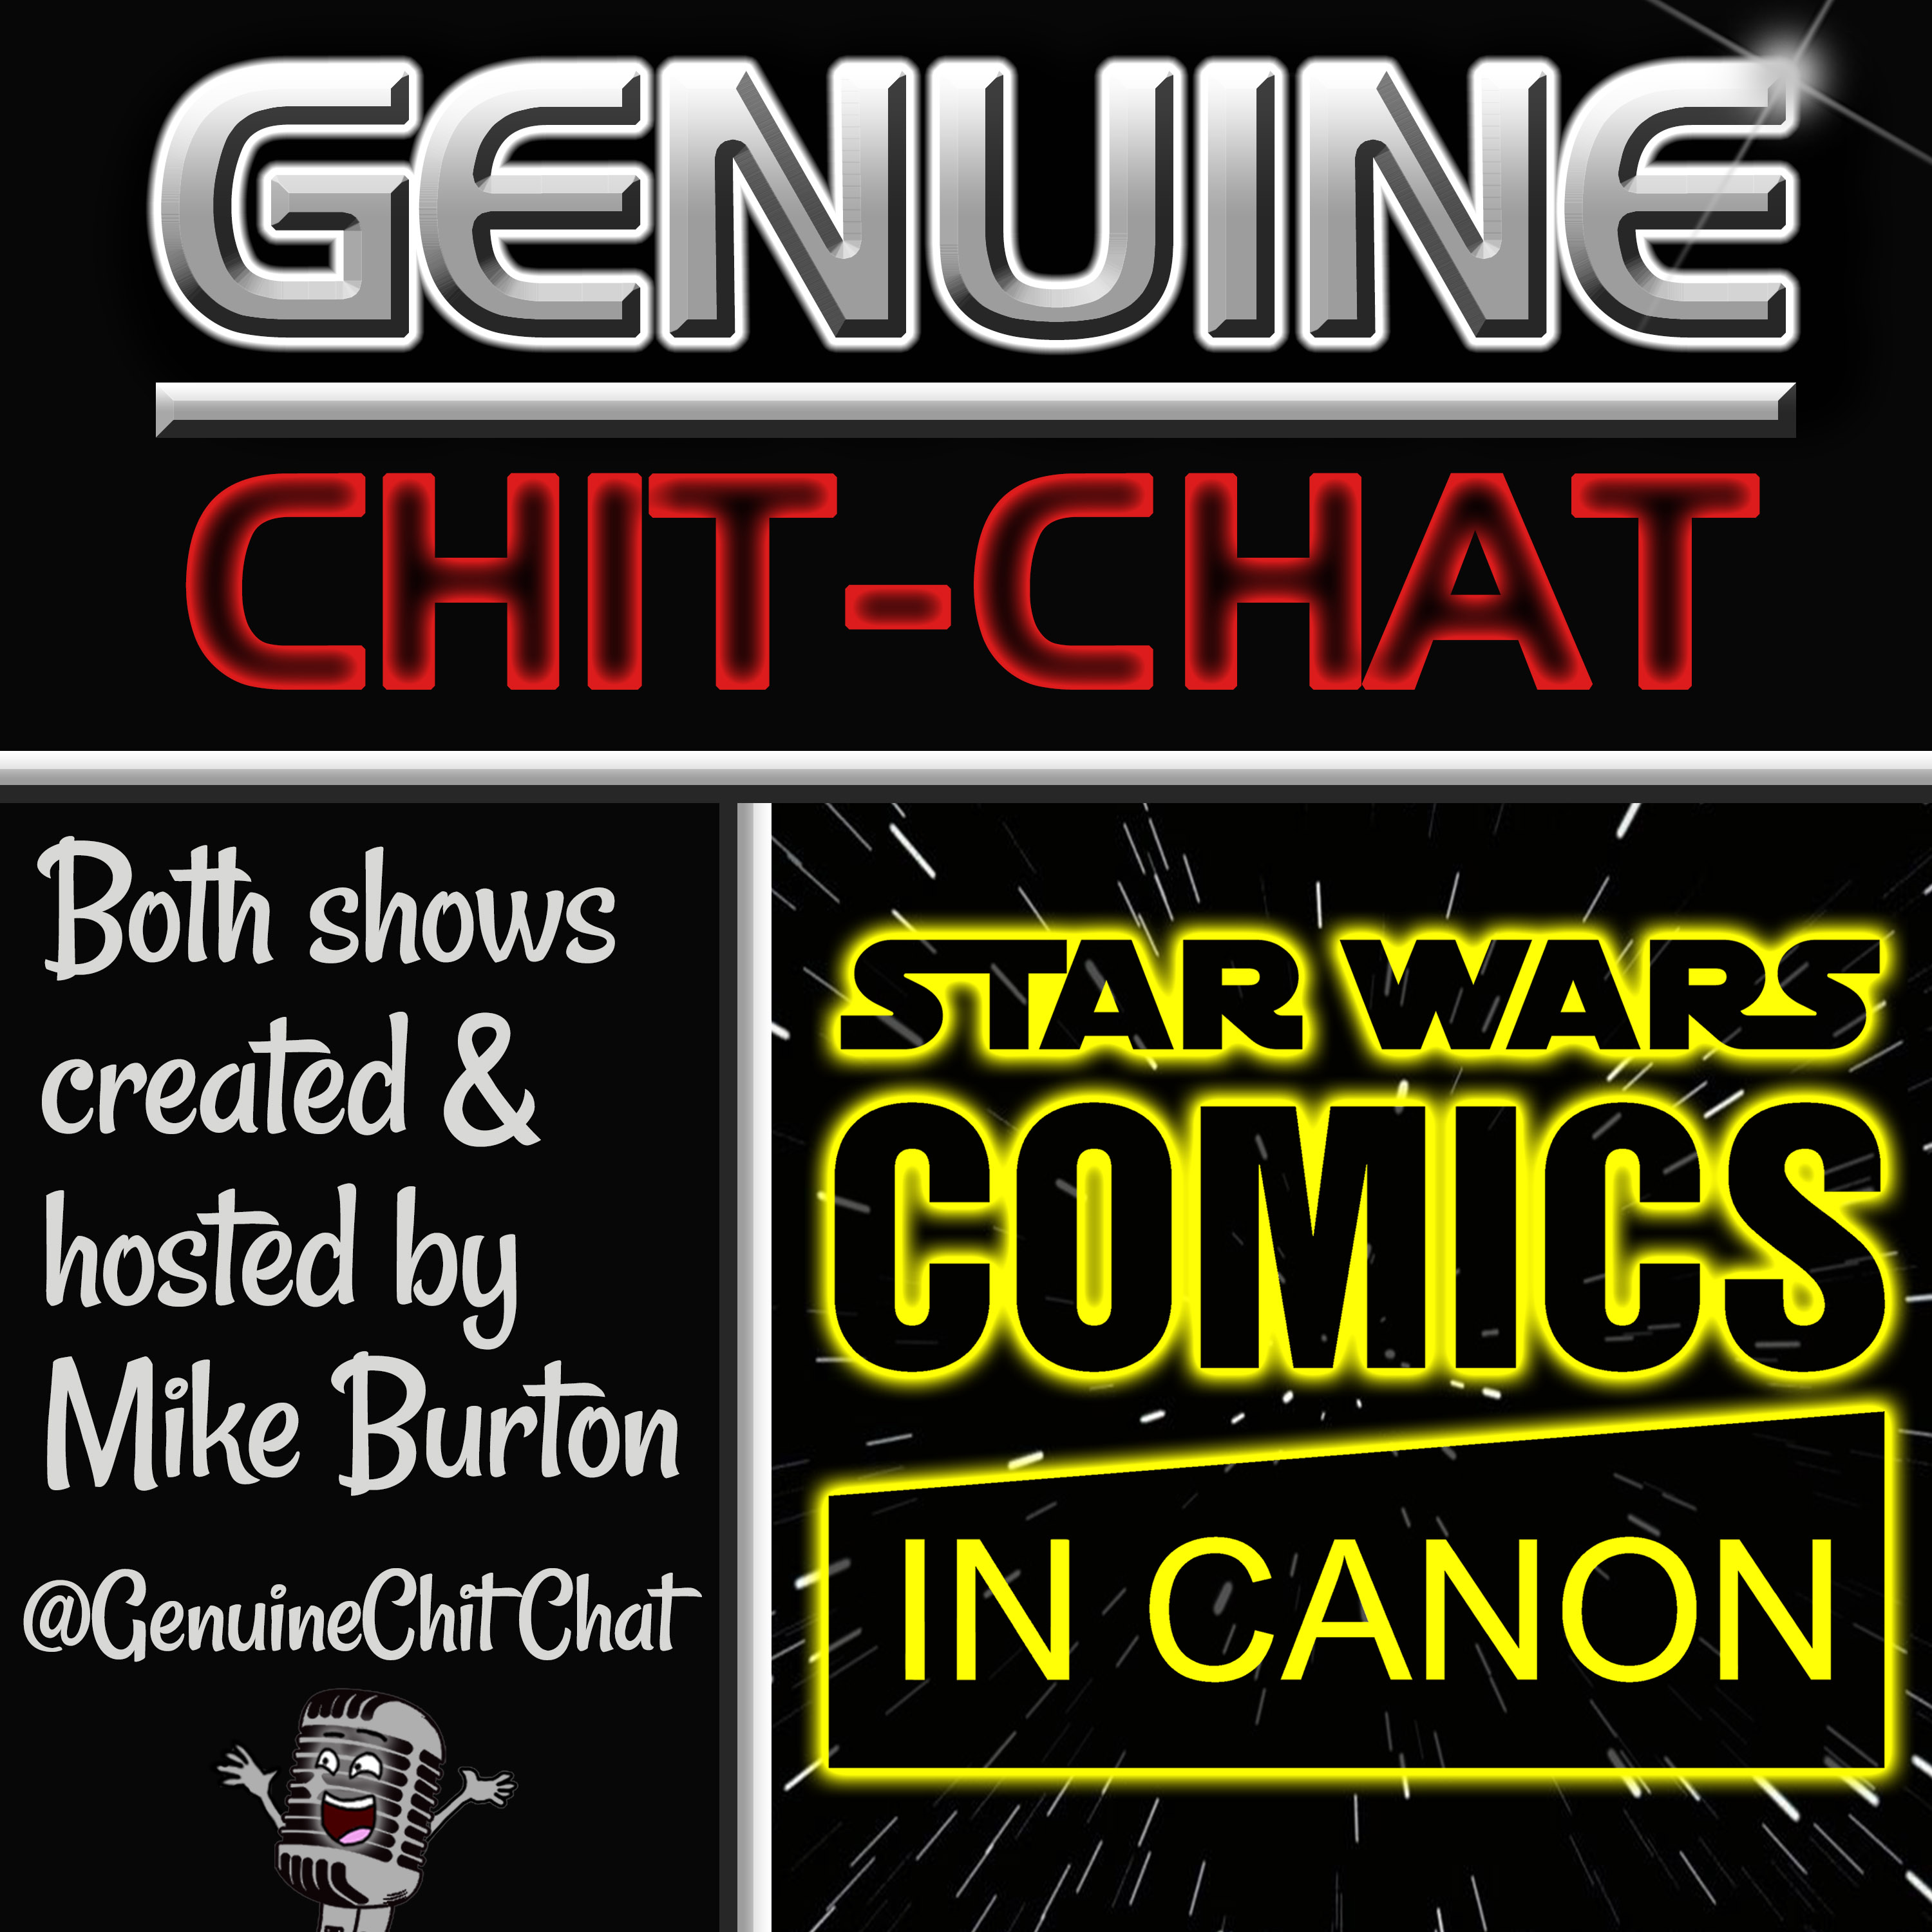 Mike Of Genuine Chit Chat and Star Wars Comics in Canon Logo